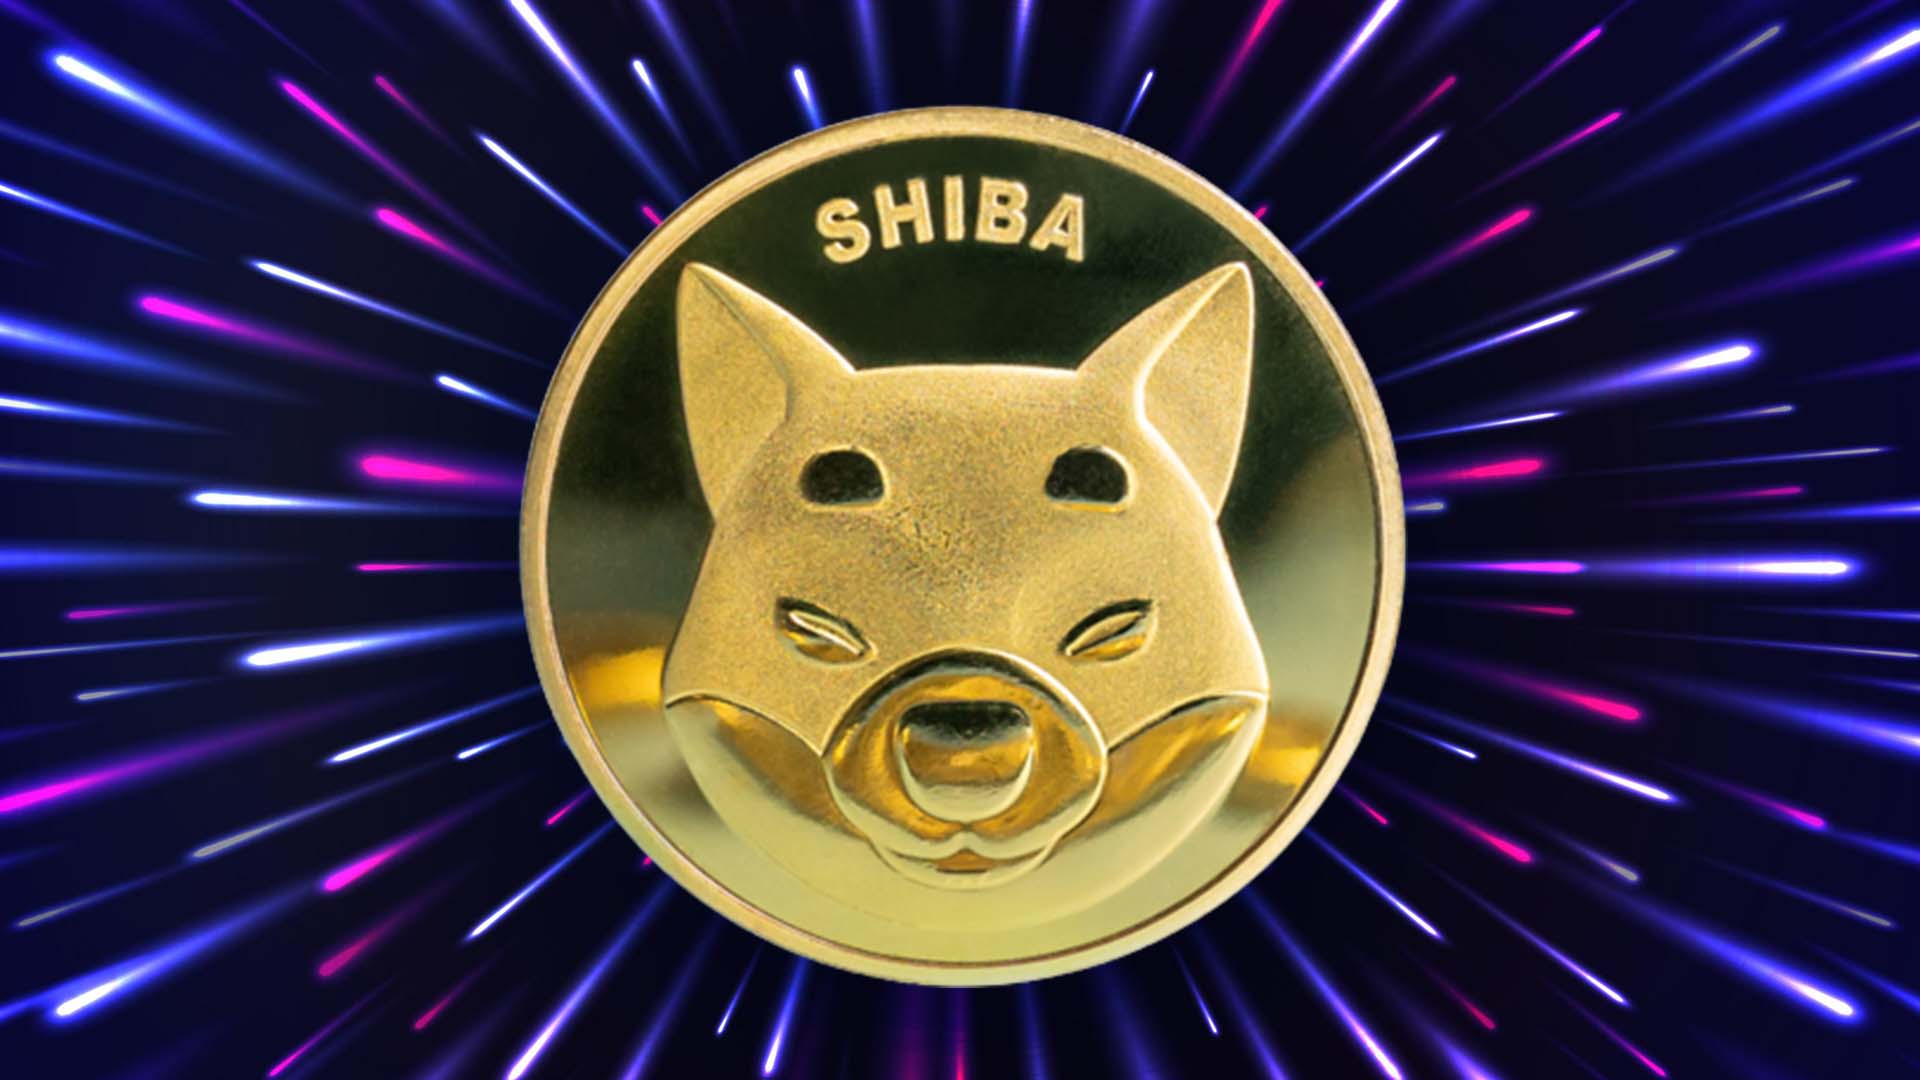 SHIBA Inu Price Analysis: Token faces strong resistance at 200 EMA, what’s next?